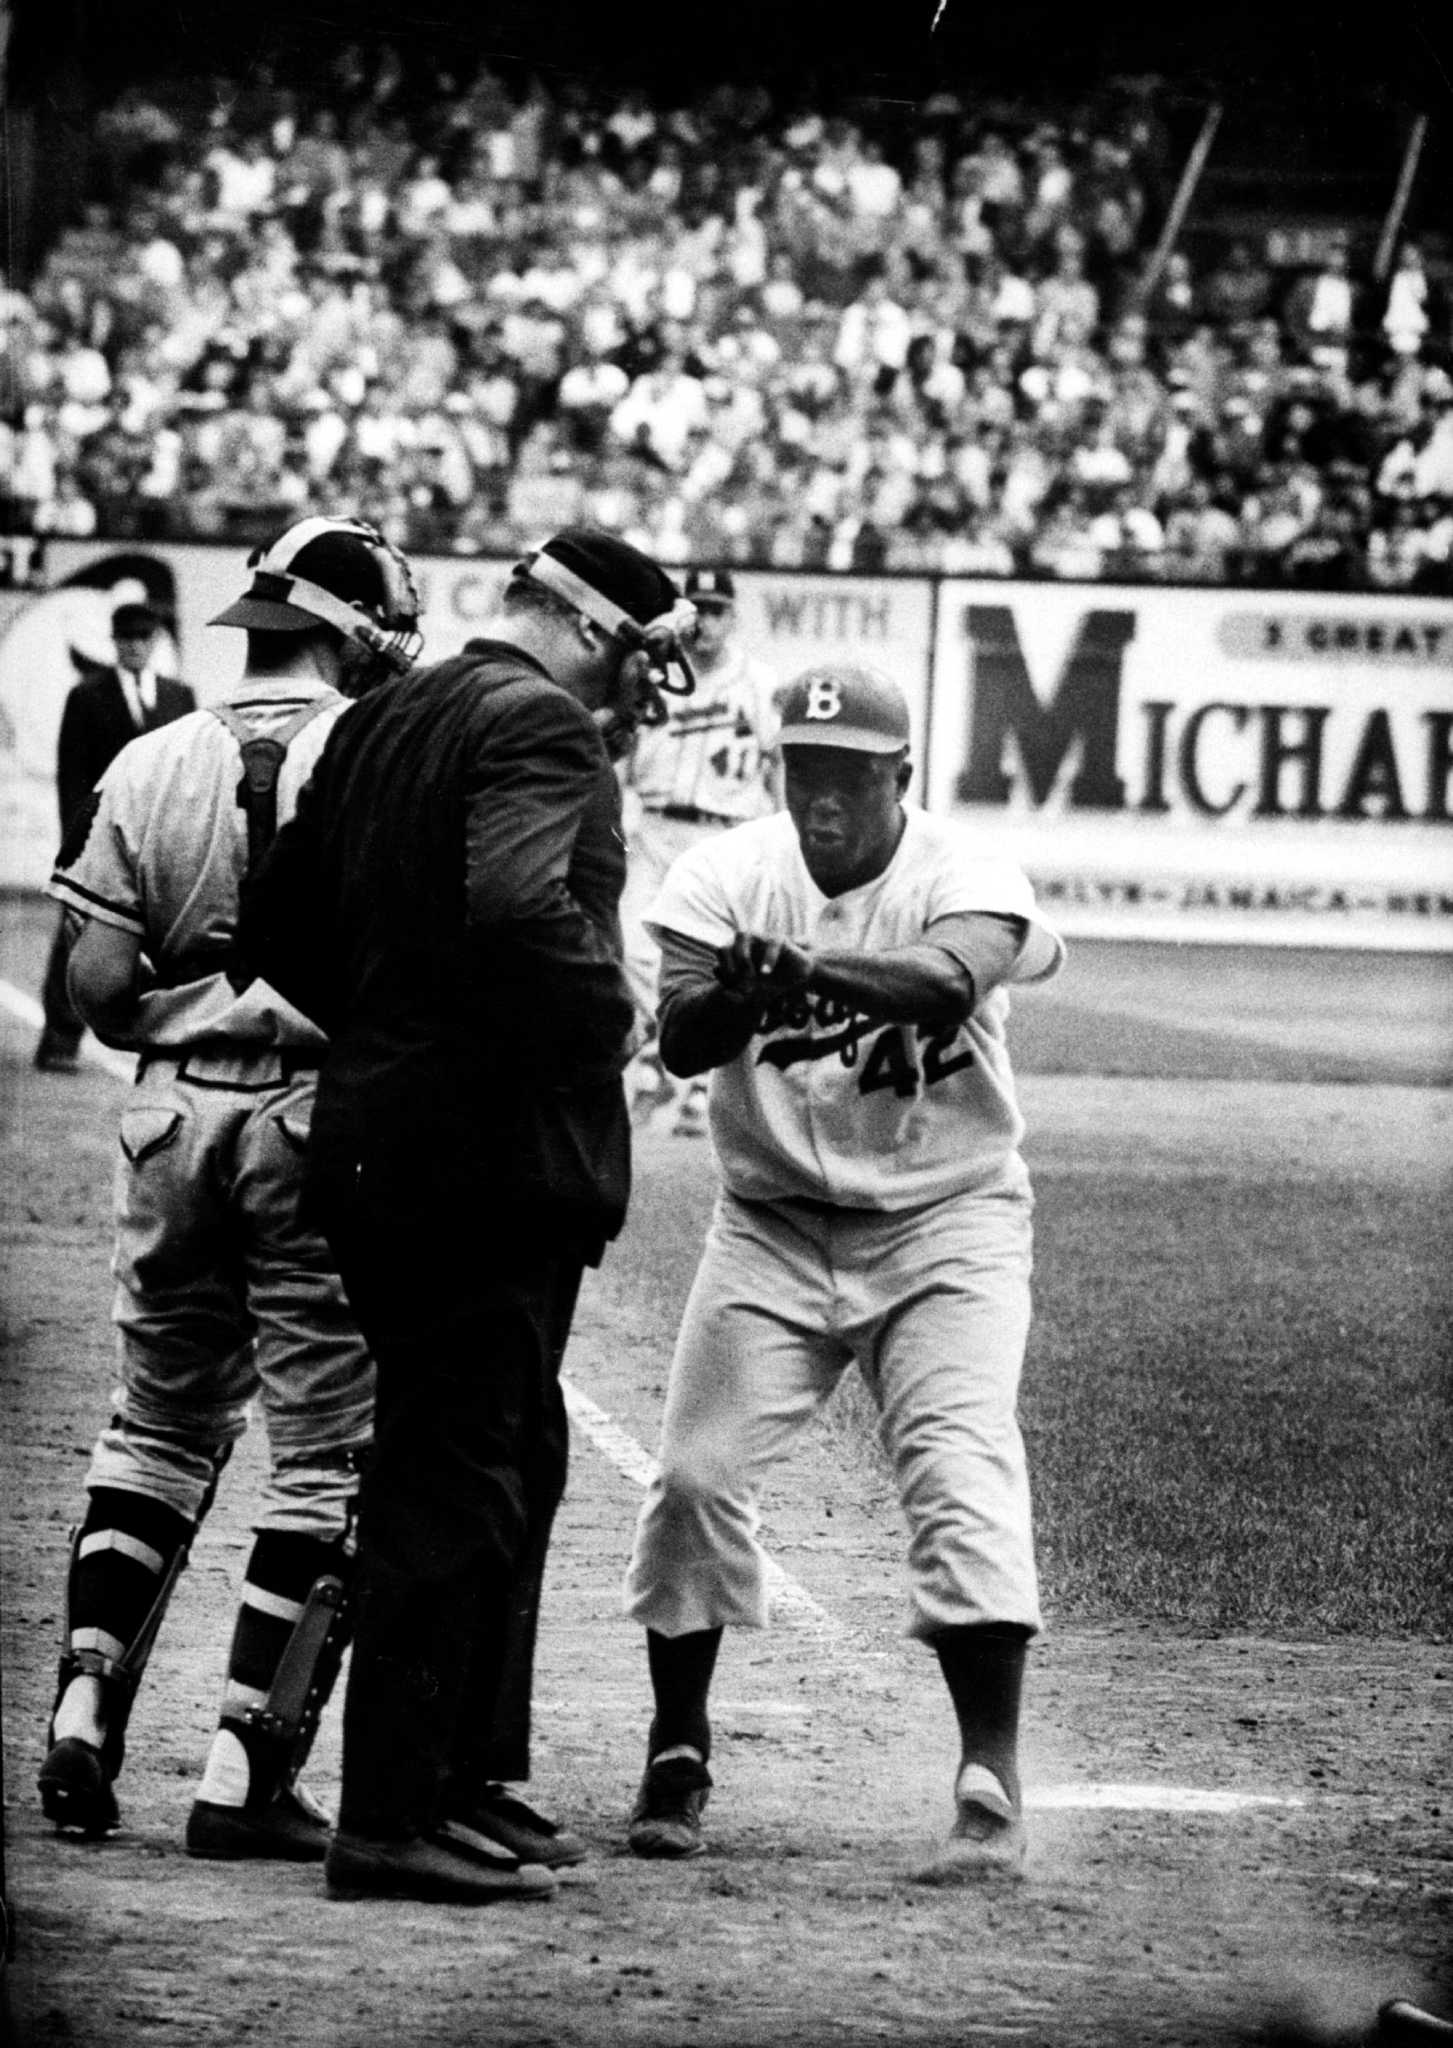 Yogi Berra arguing with umpire over his safe call in the 1st